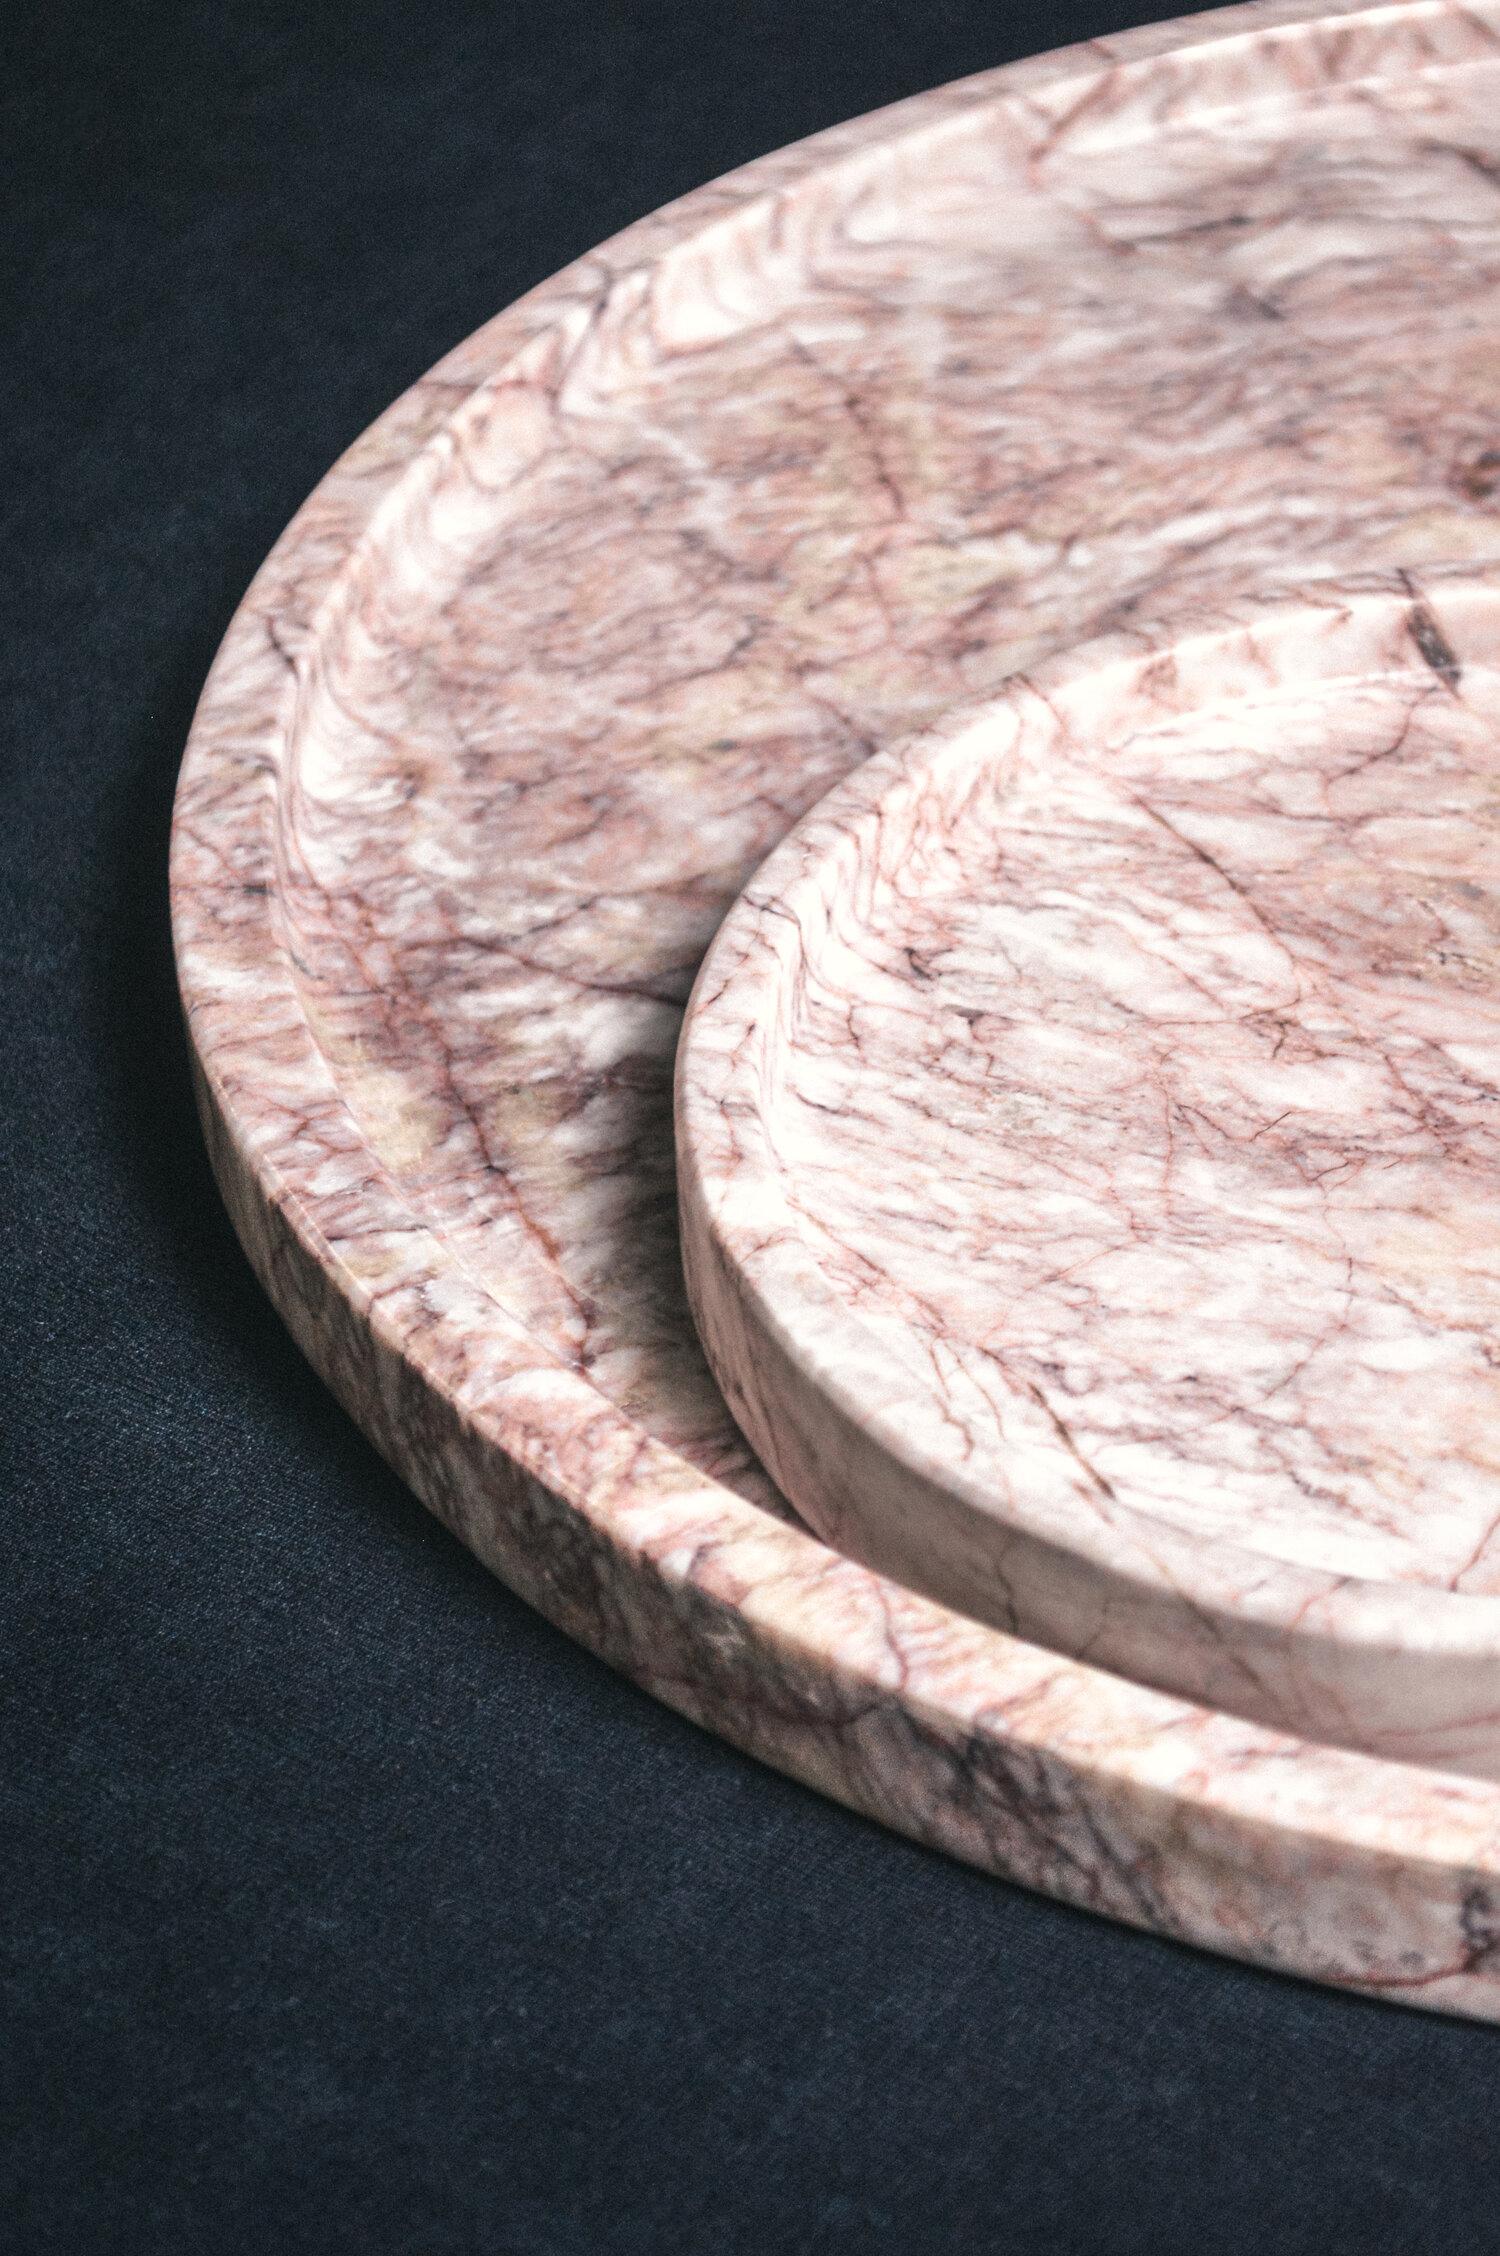 Hand crafted Merida Trays are a stunning addition to every table spread, perfect for entertaining. The trays are hand-carved from Mexican Jaspe Rose Marble, boasting a rose color mix with thin red and white veining. Unearthed from the quarries of